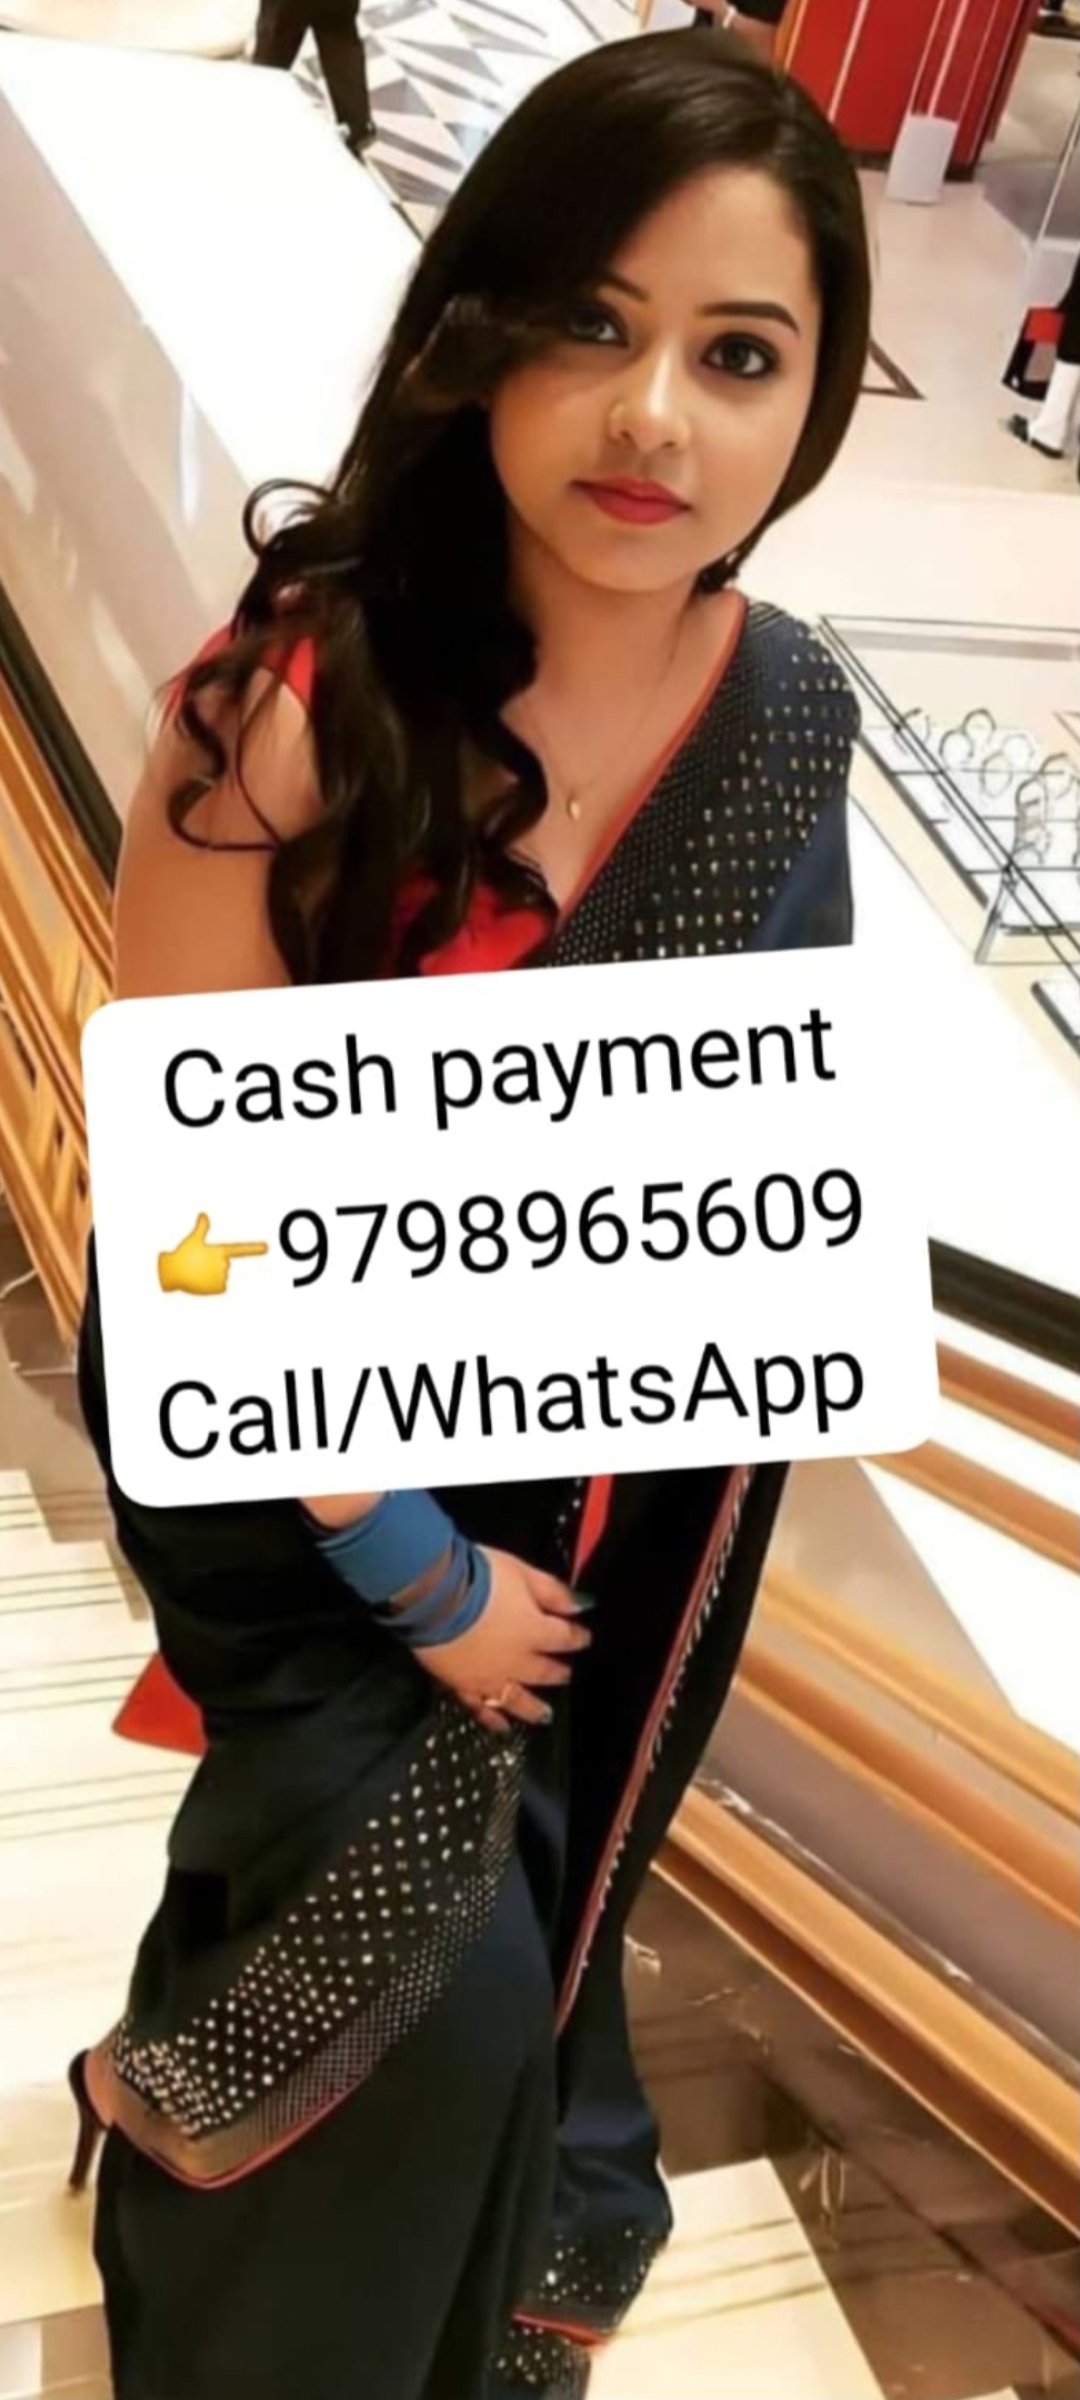 Swargate in VIP model college girl anytime available service 